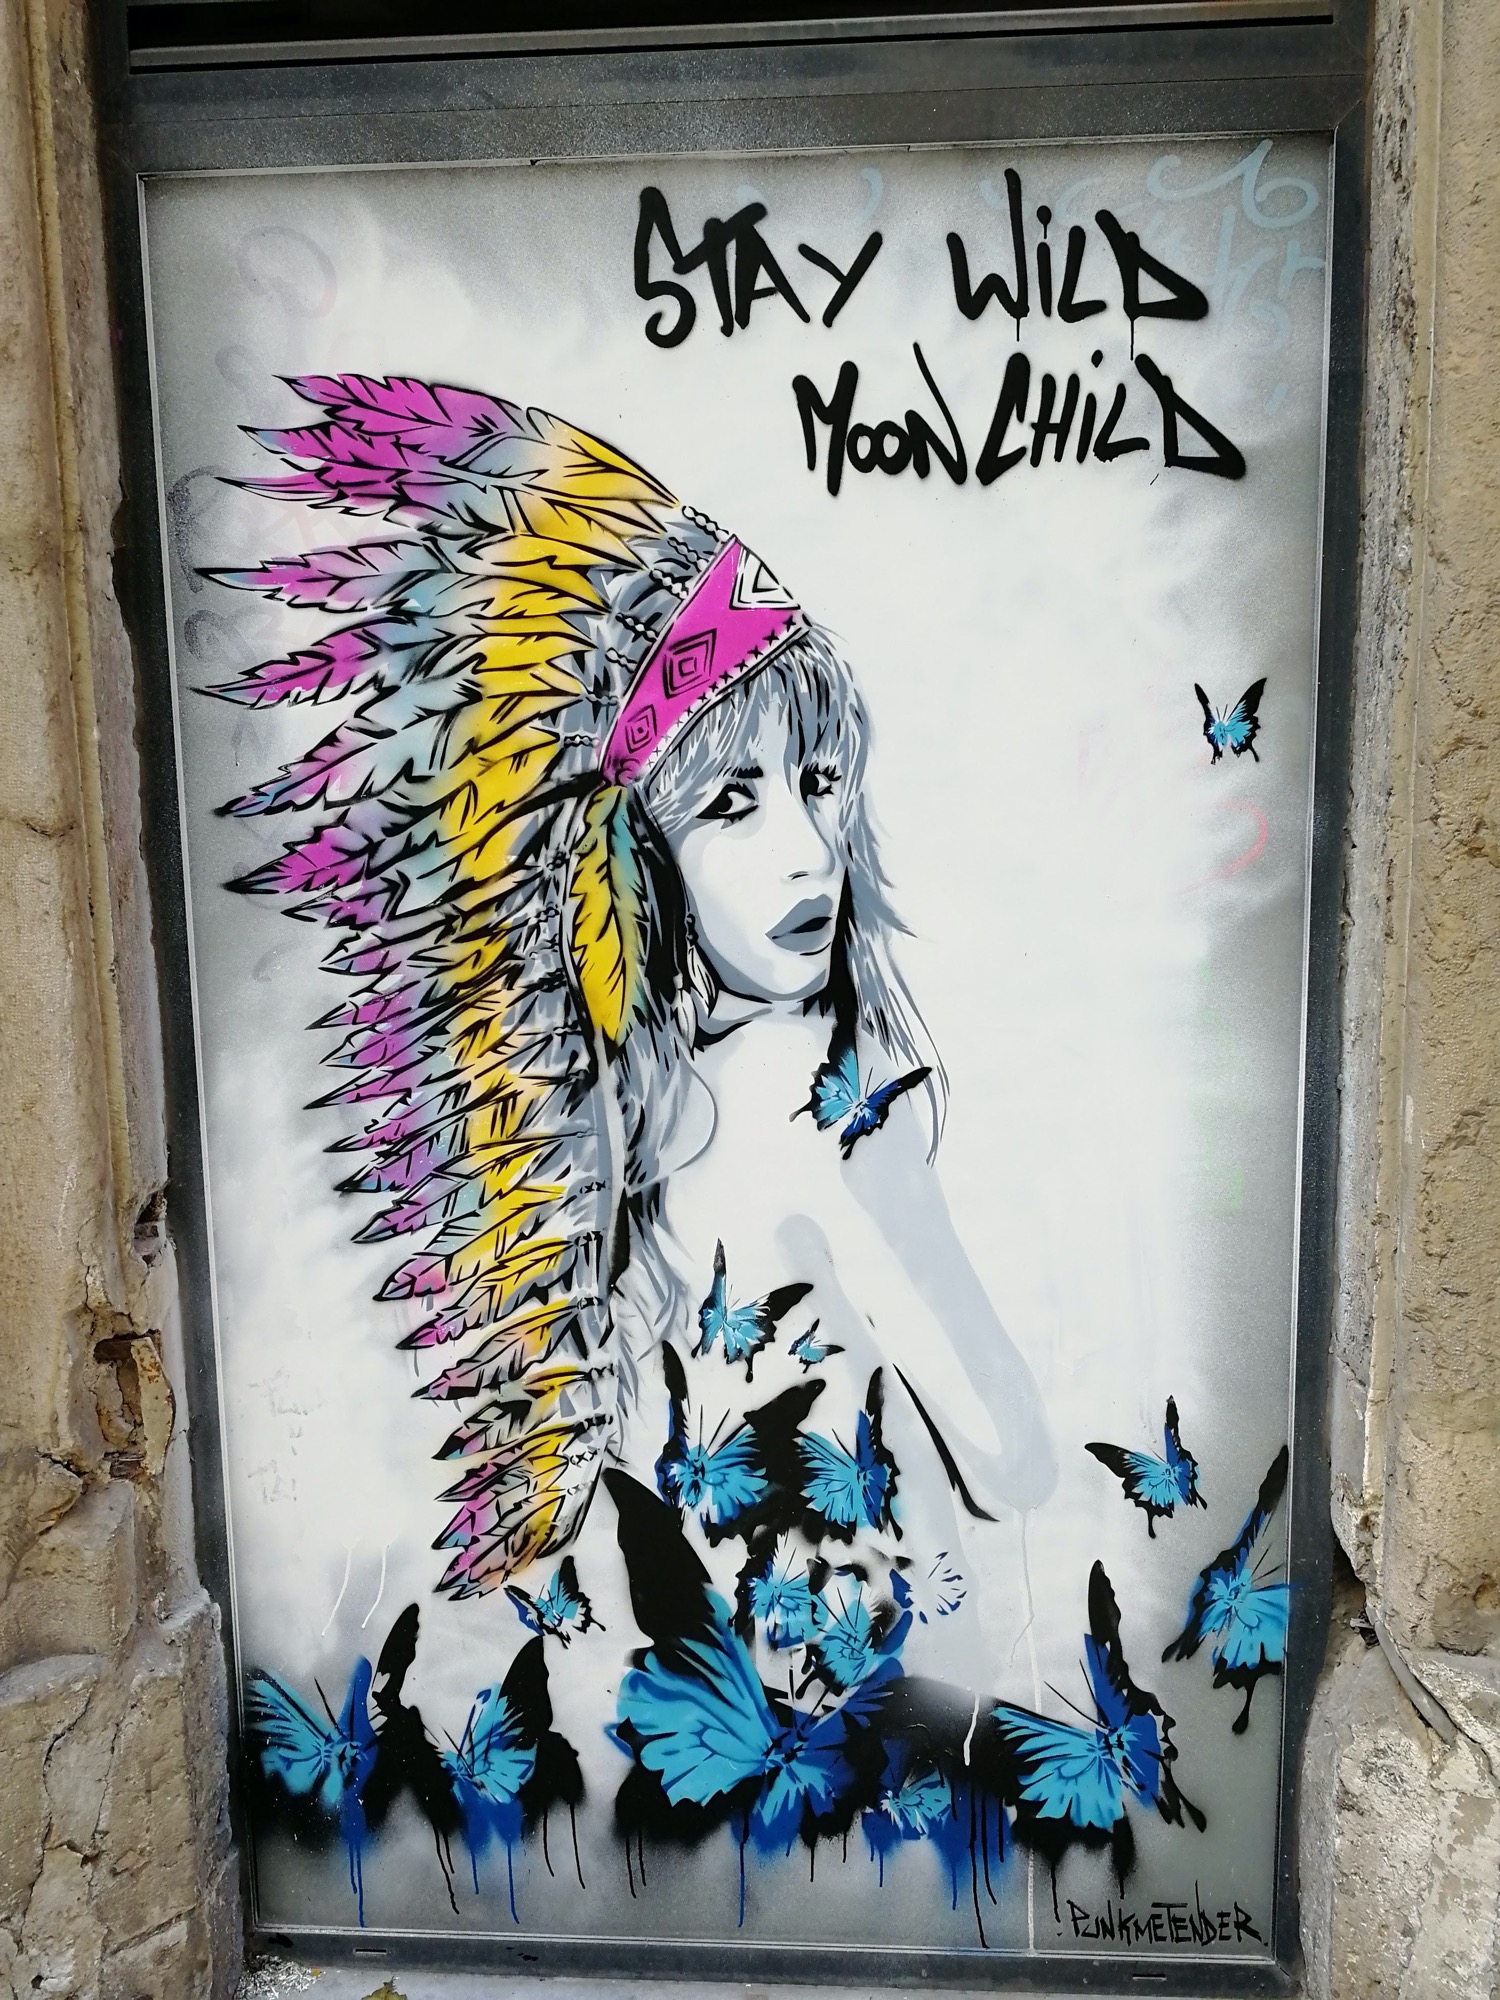 Graffiti 1599 Stay wild moon child captured by Rabot in Lyon France